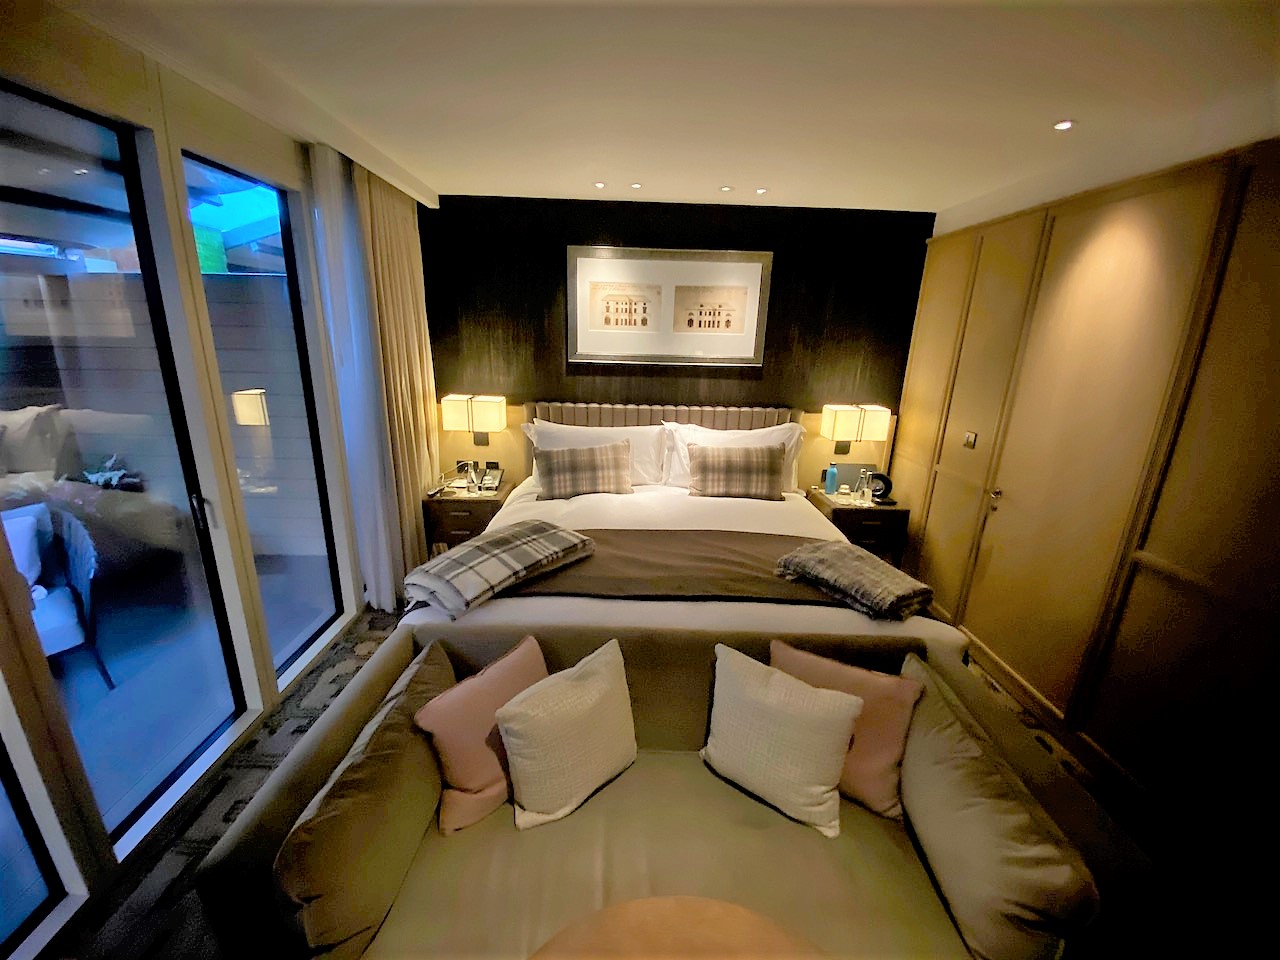 The Langley A Luxury Collection hotel Bedroom